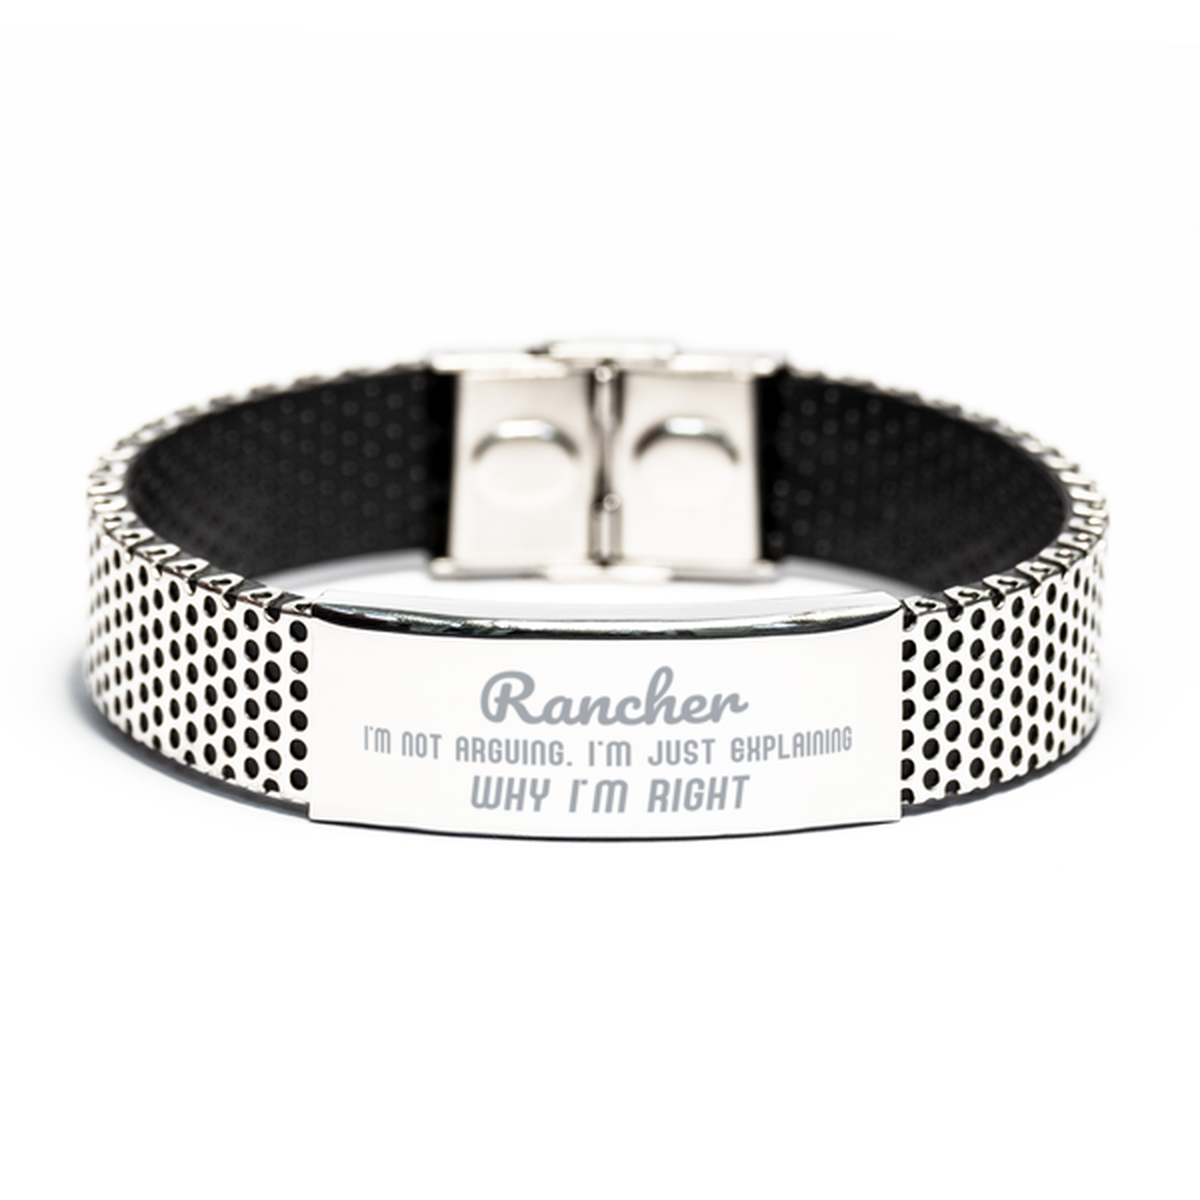 Rancher I'm not Arguing. I'm Just Explaining Why I'm RIGHT Stainless Steel Bracelet, Funny Saying Quote Rancher Gifts For Rancher Graduation Birthday Christmas Gifts for Men Women Coworker